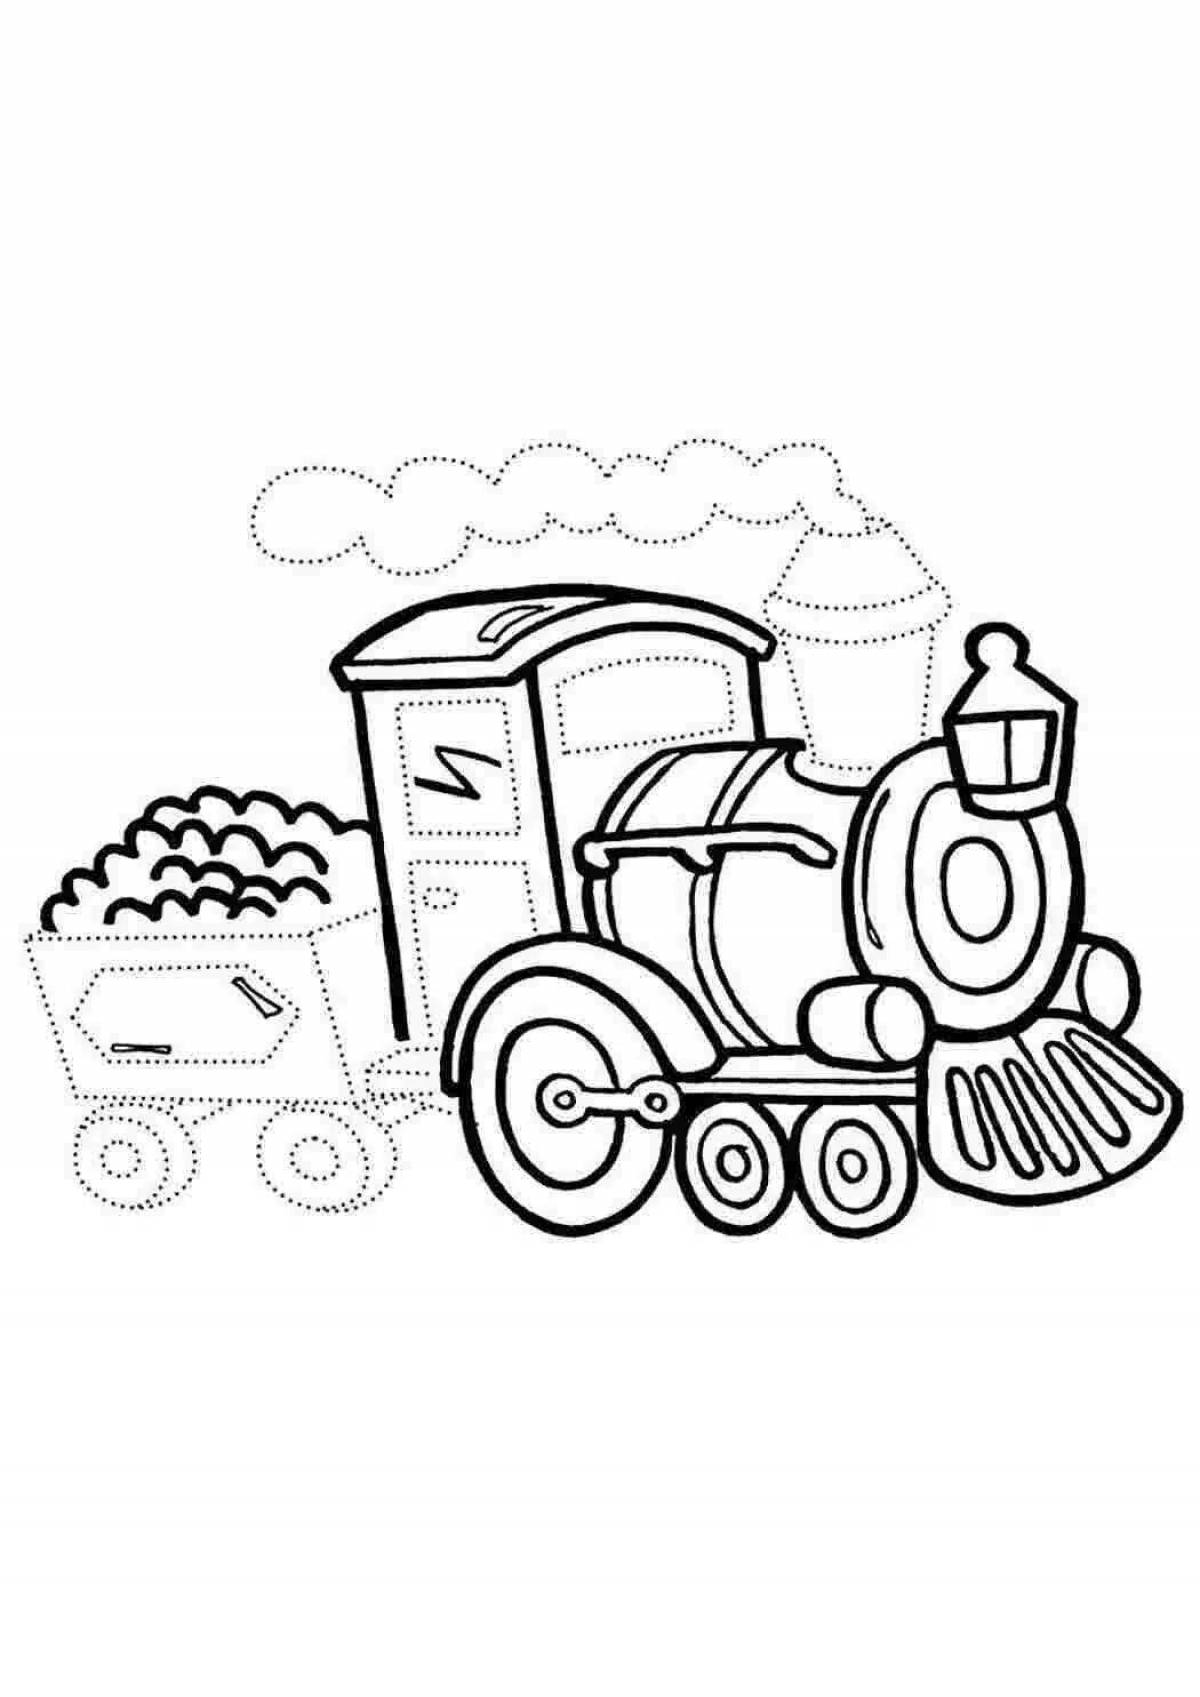 Funny train coloring book for kids